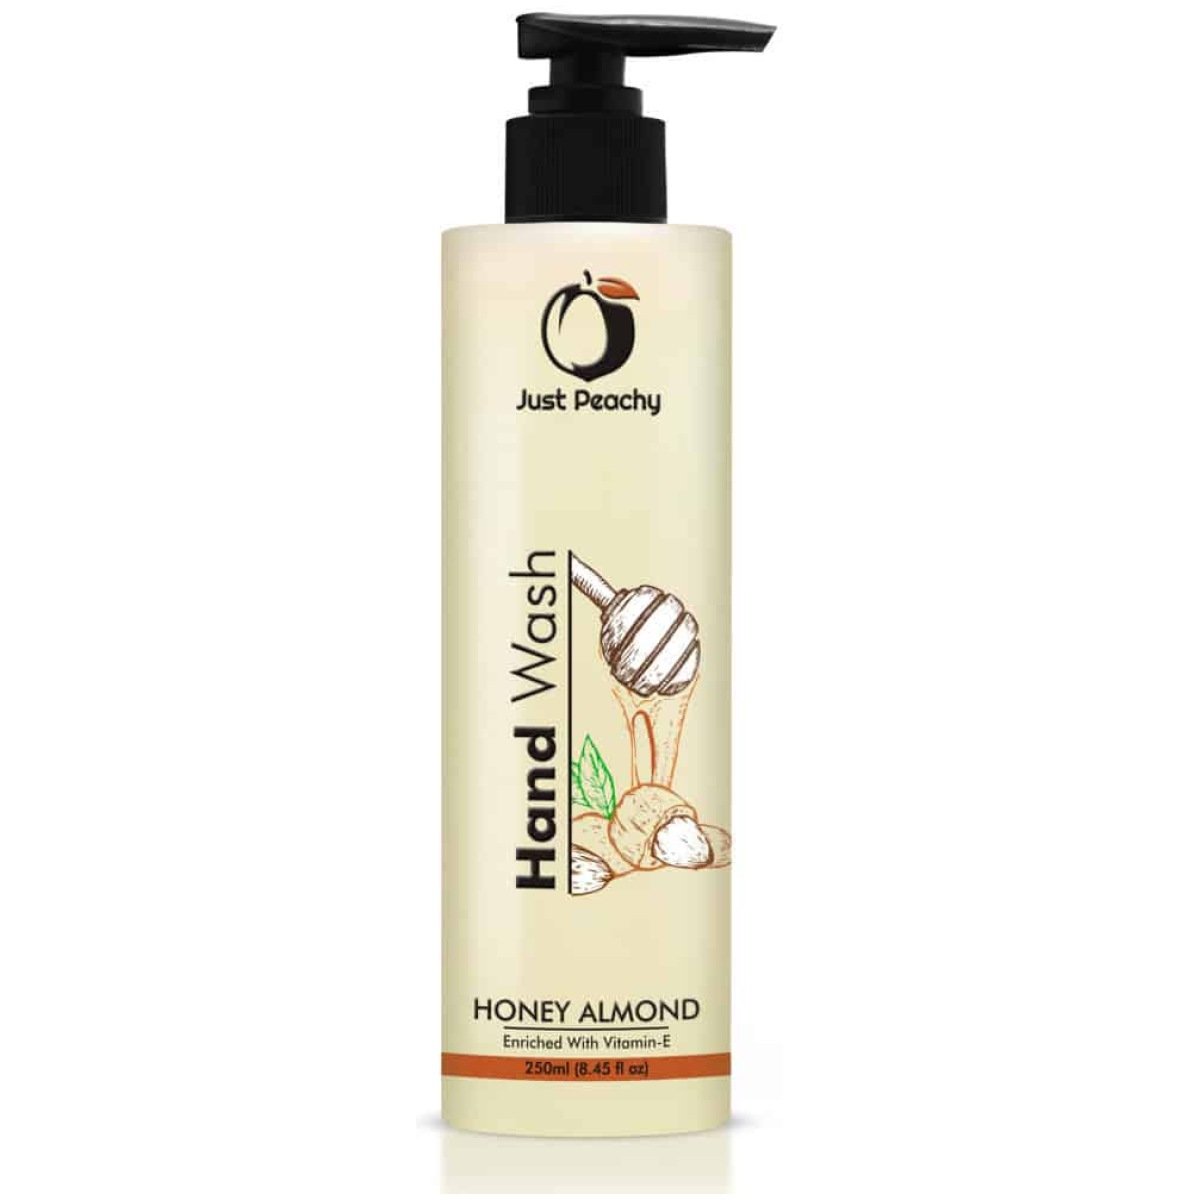 Just Peachy Moisturizing Honey Almond Hand Wash Enriched With Vitamin E 250ml